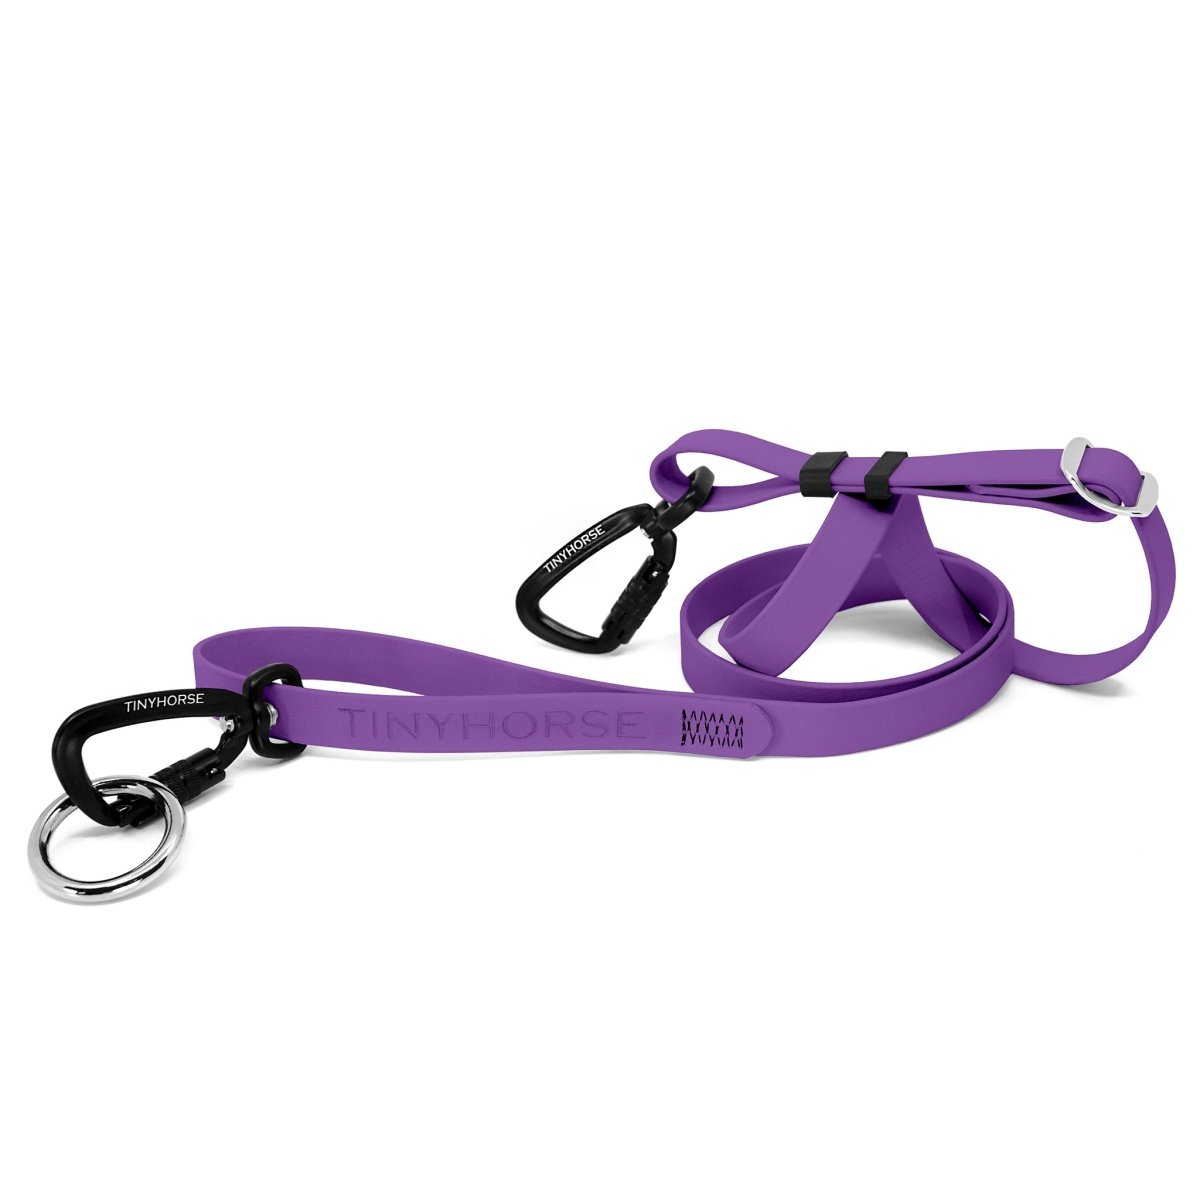 Lead-All Pro Extra - Lilac-coloured adjustable dog leash made of biothane. There are black auto-locking carabiner clips on either end. TinyHorse is stamped onto the leash handle